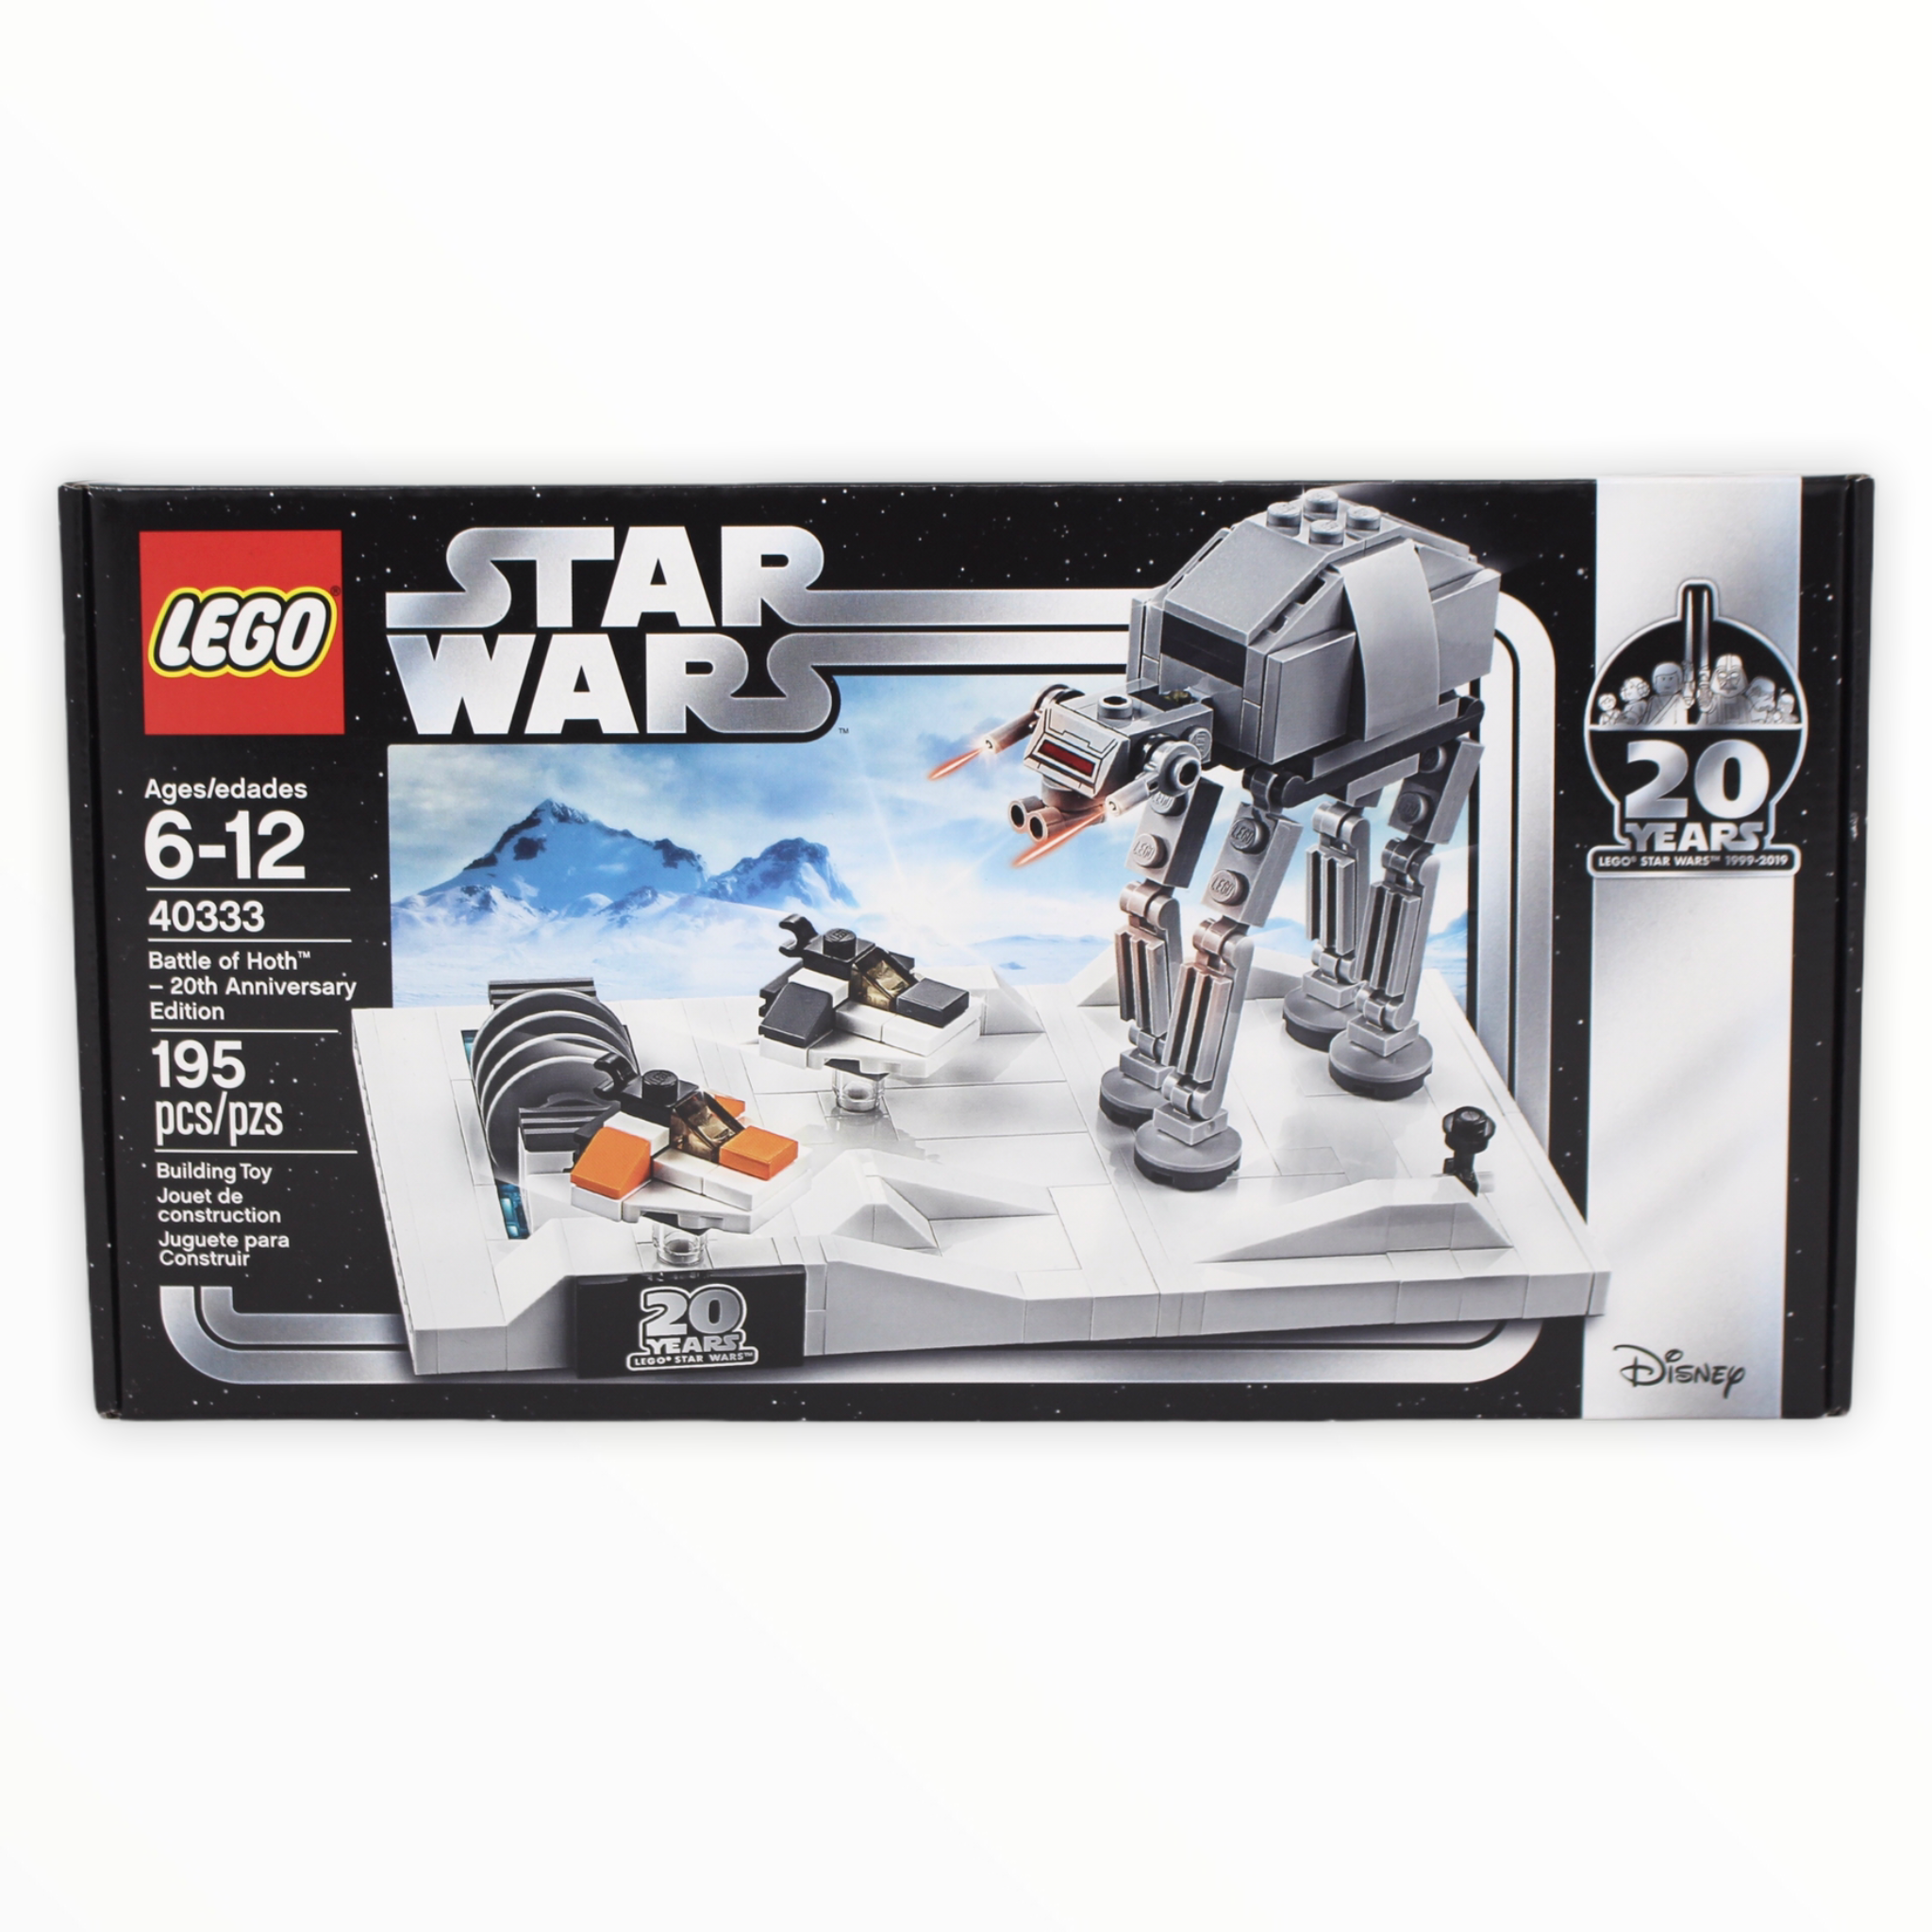 Retired Set 40333 Star Wars Battle of Hoth - 20th Anniversary Edition